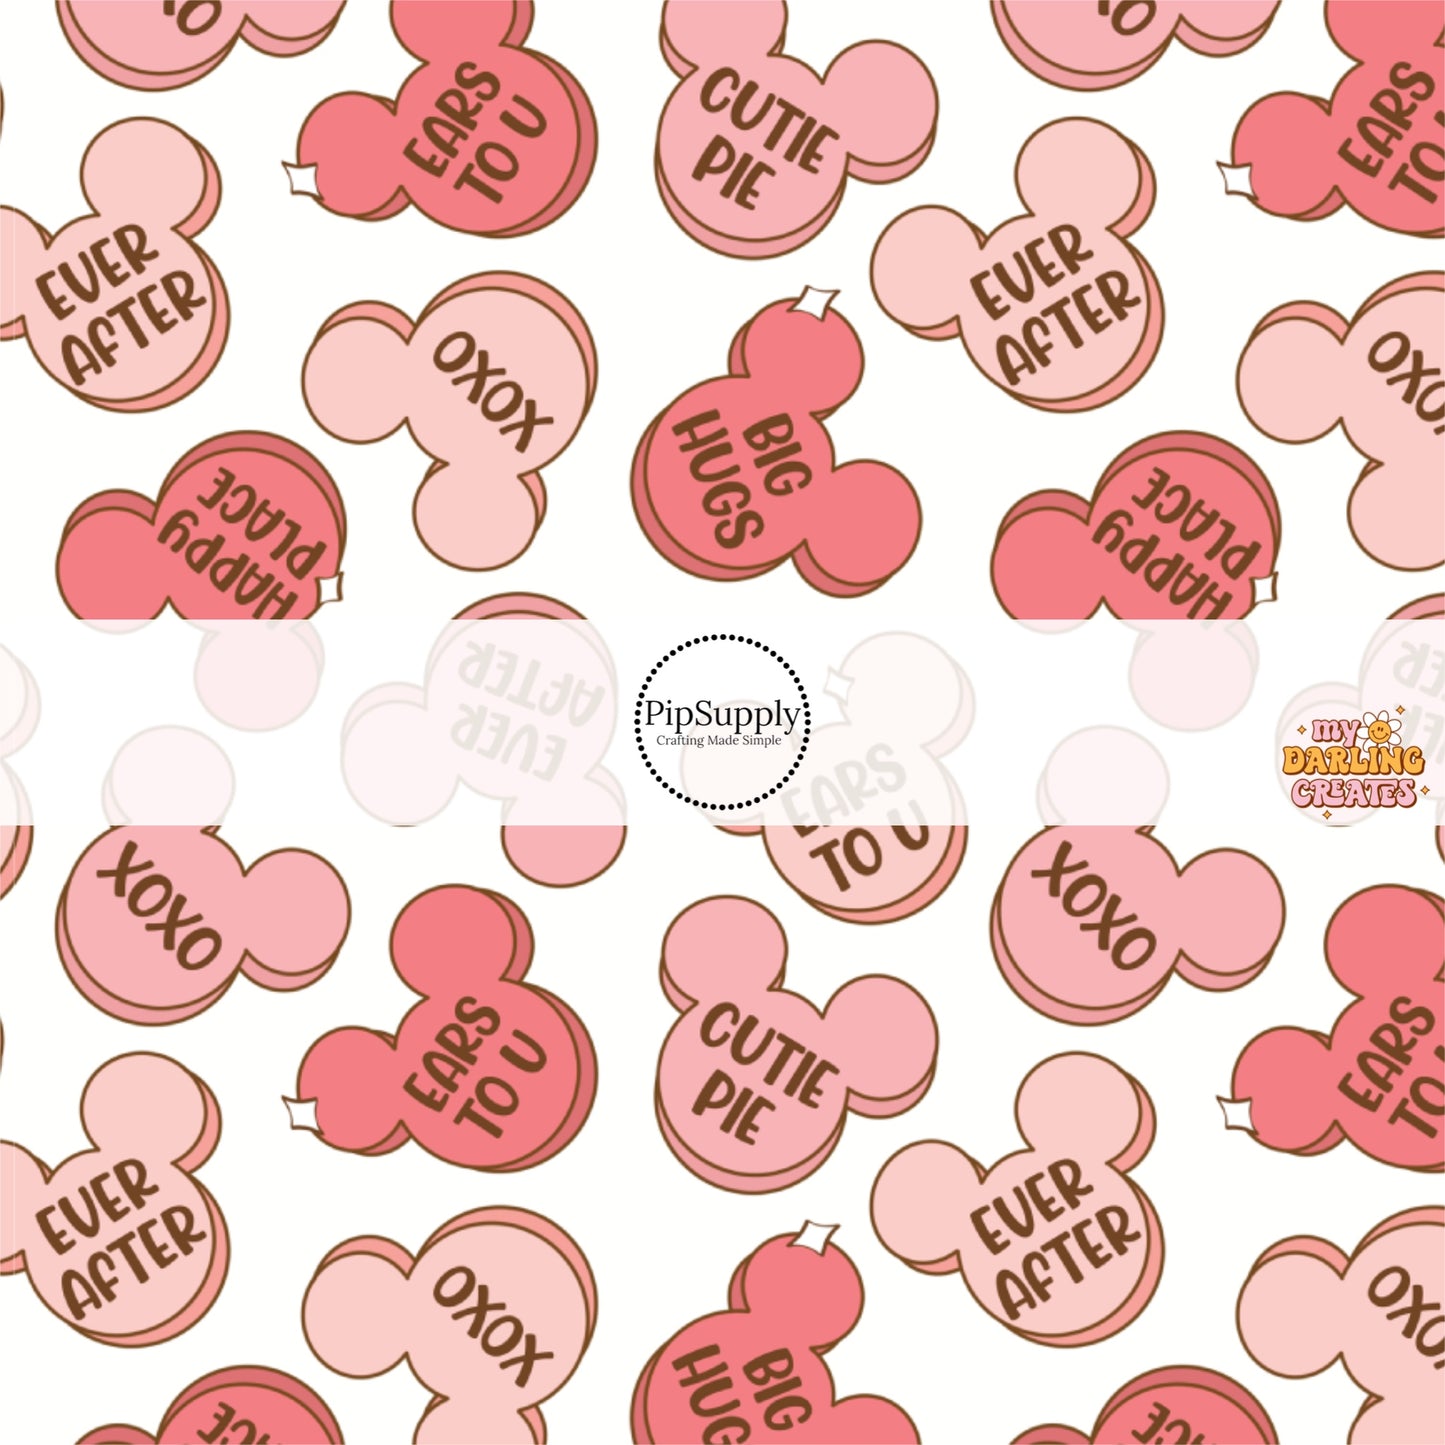 Scattered mouse candy and sayings on cream hair bow strips